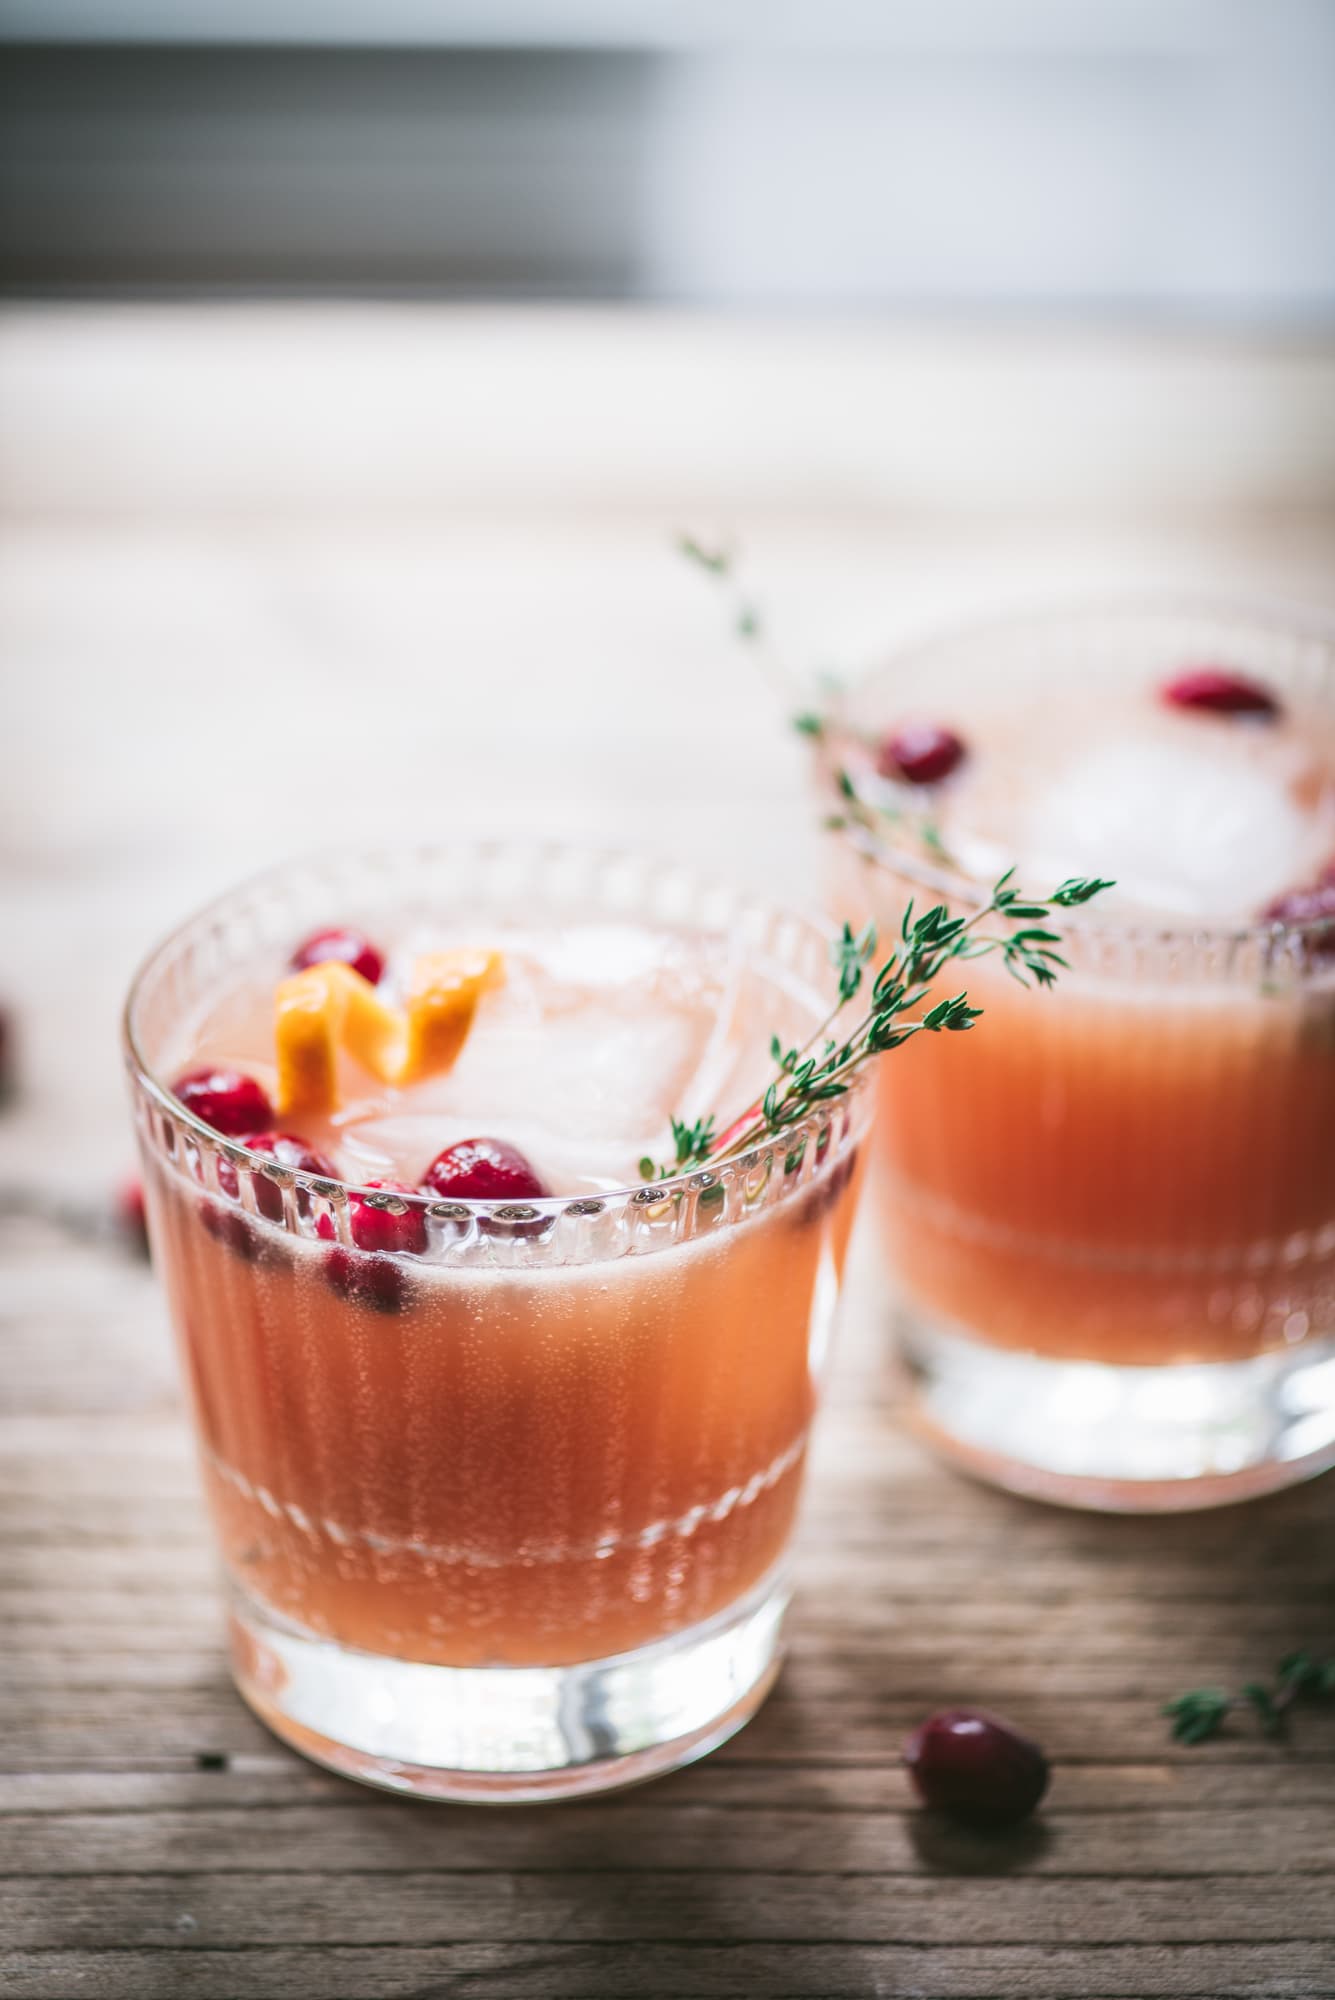 Two cranberry orange cocktails garnished with fresh thyme on a wood table with window in background